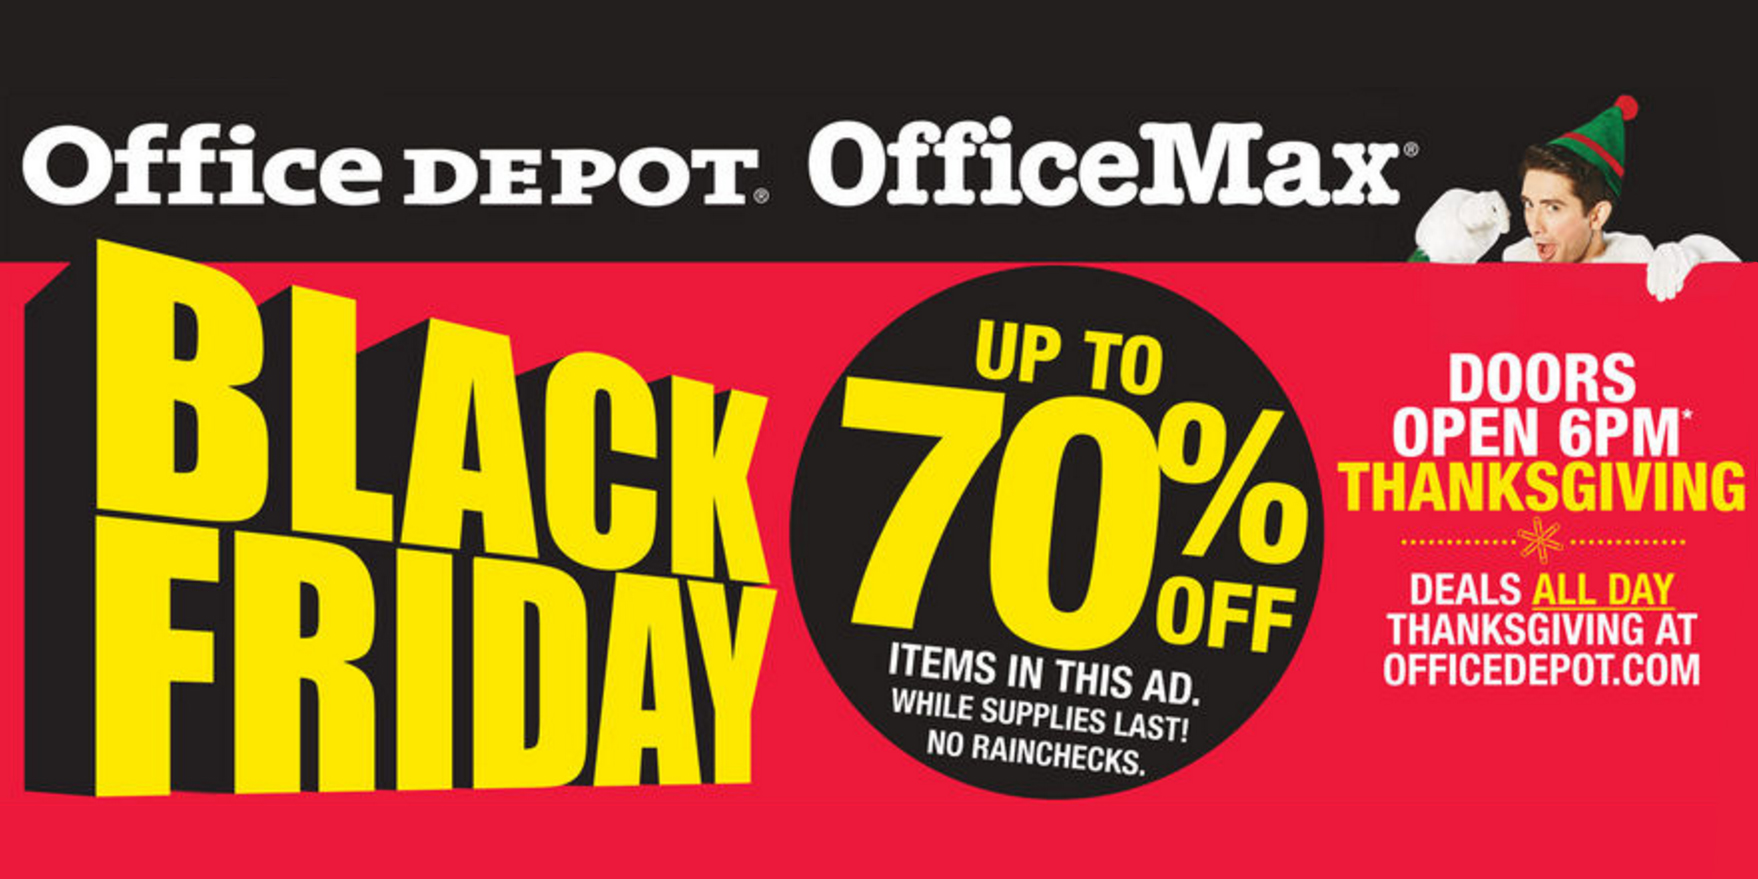 The Office Depot & OfficeMax Black Friday ad doesn't bring much to the